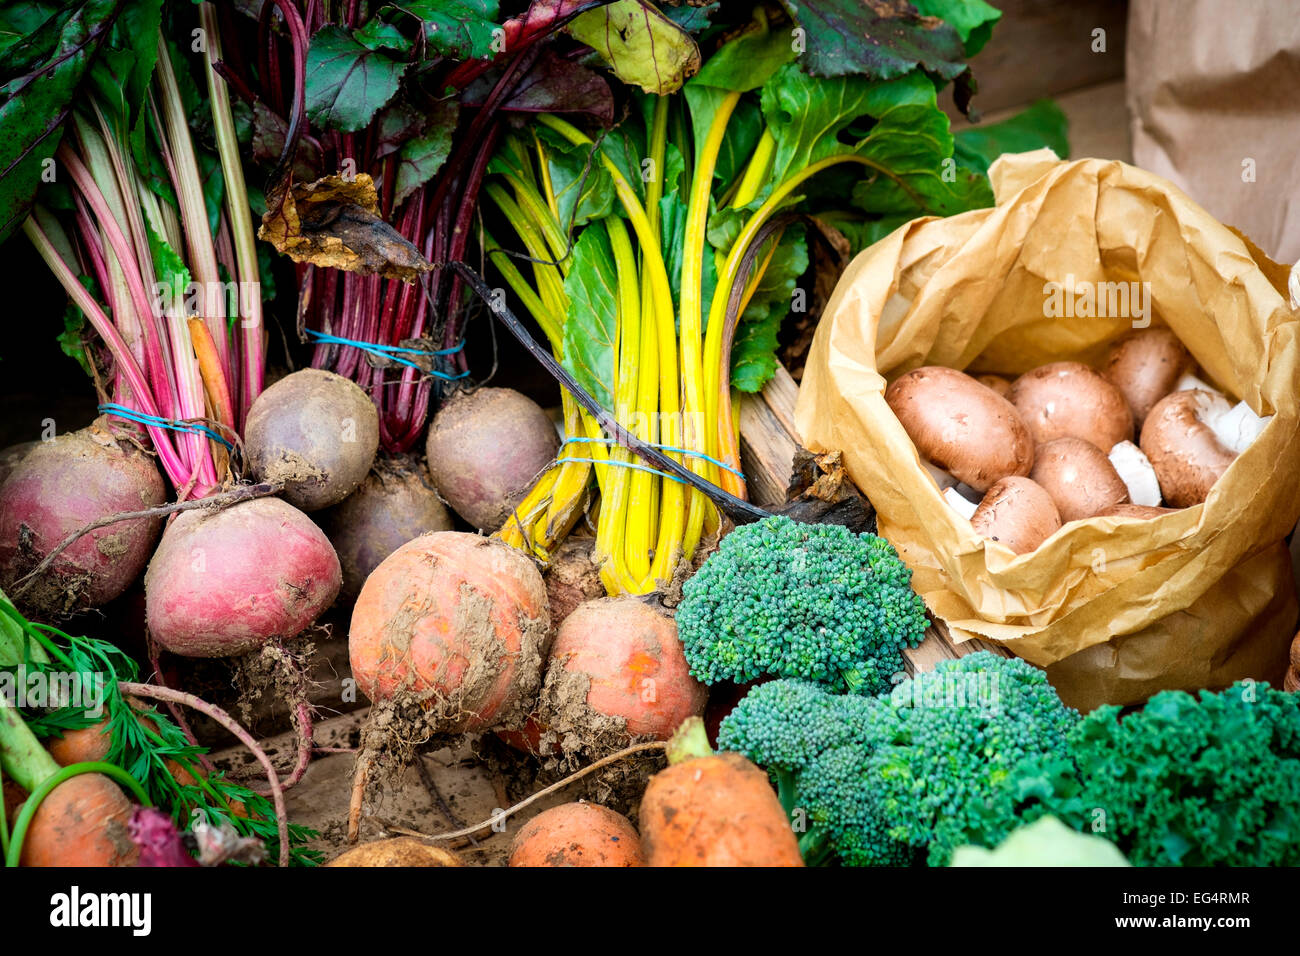 Variety of local fresh vegetables on farmers market stall, Isles of Scilly, UK Stock Photo